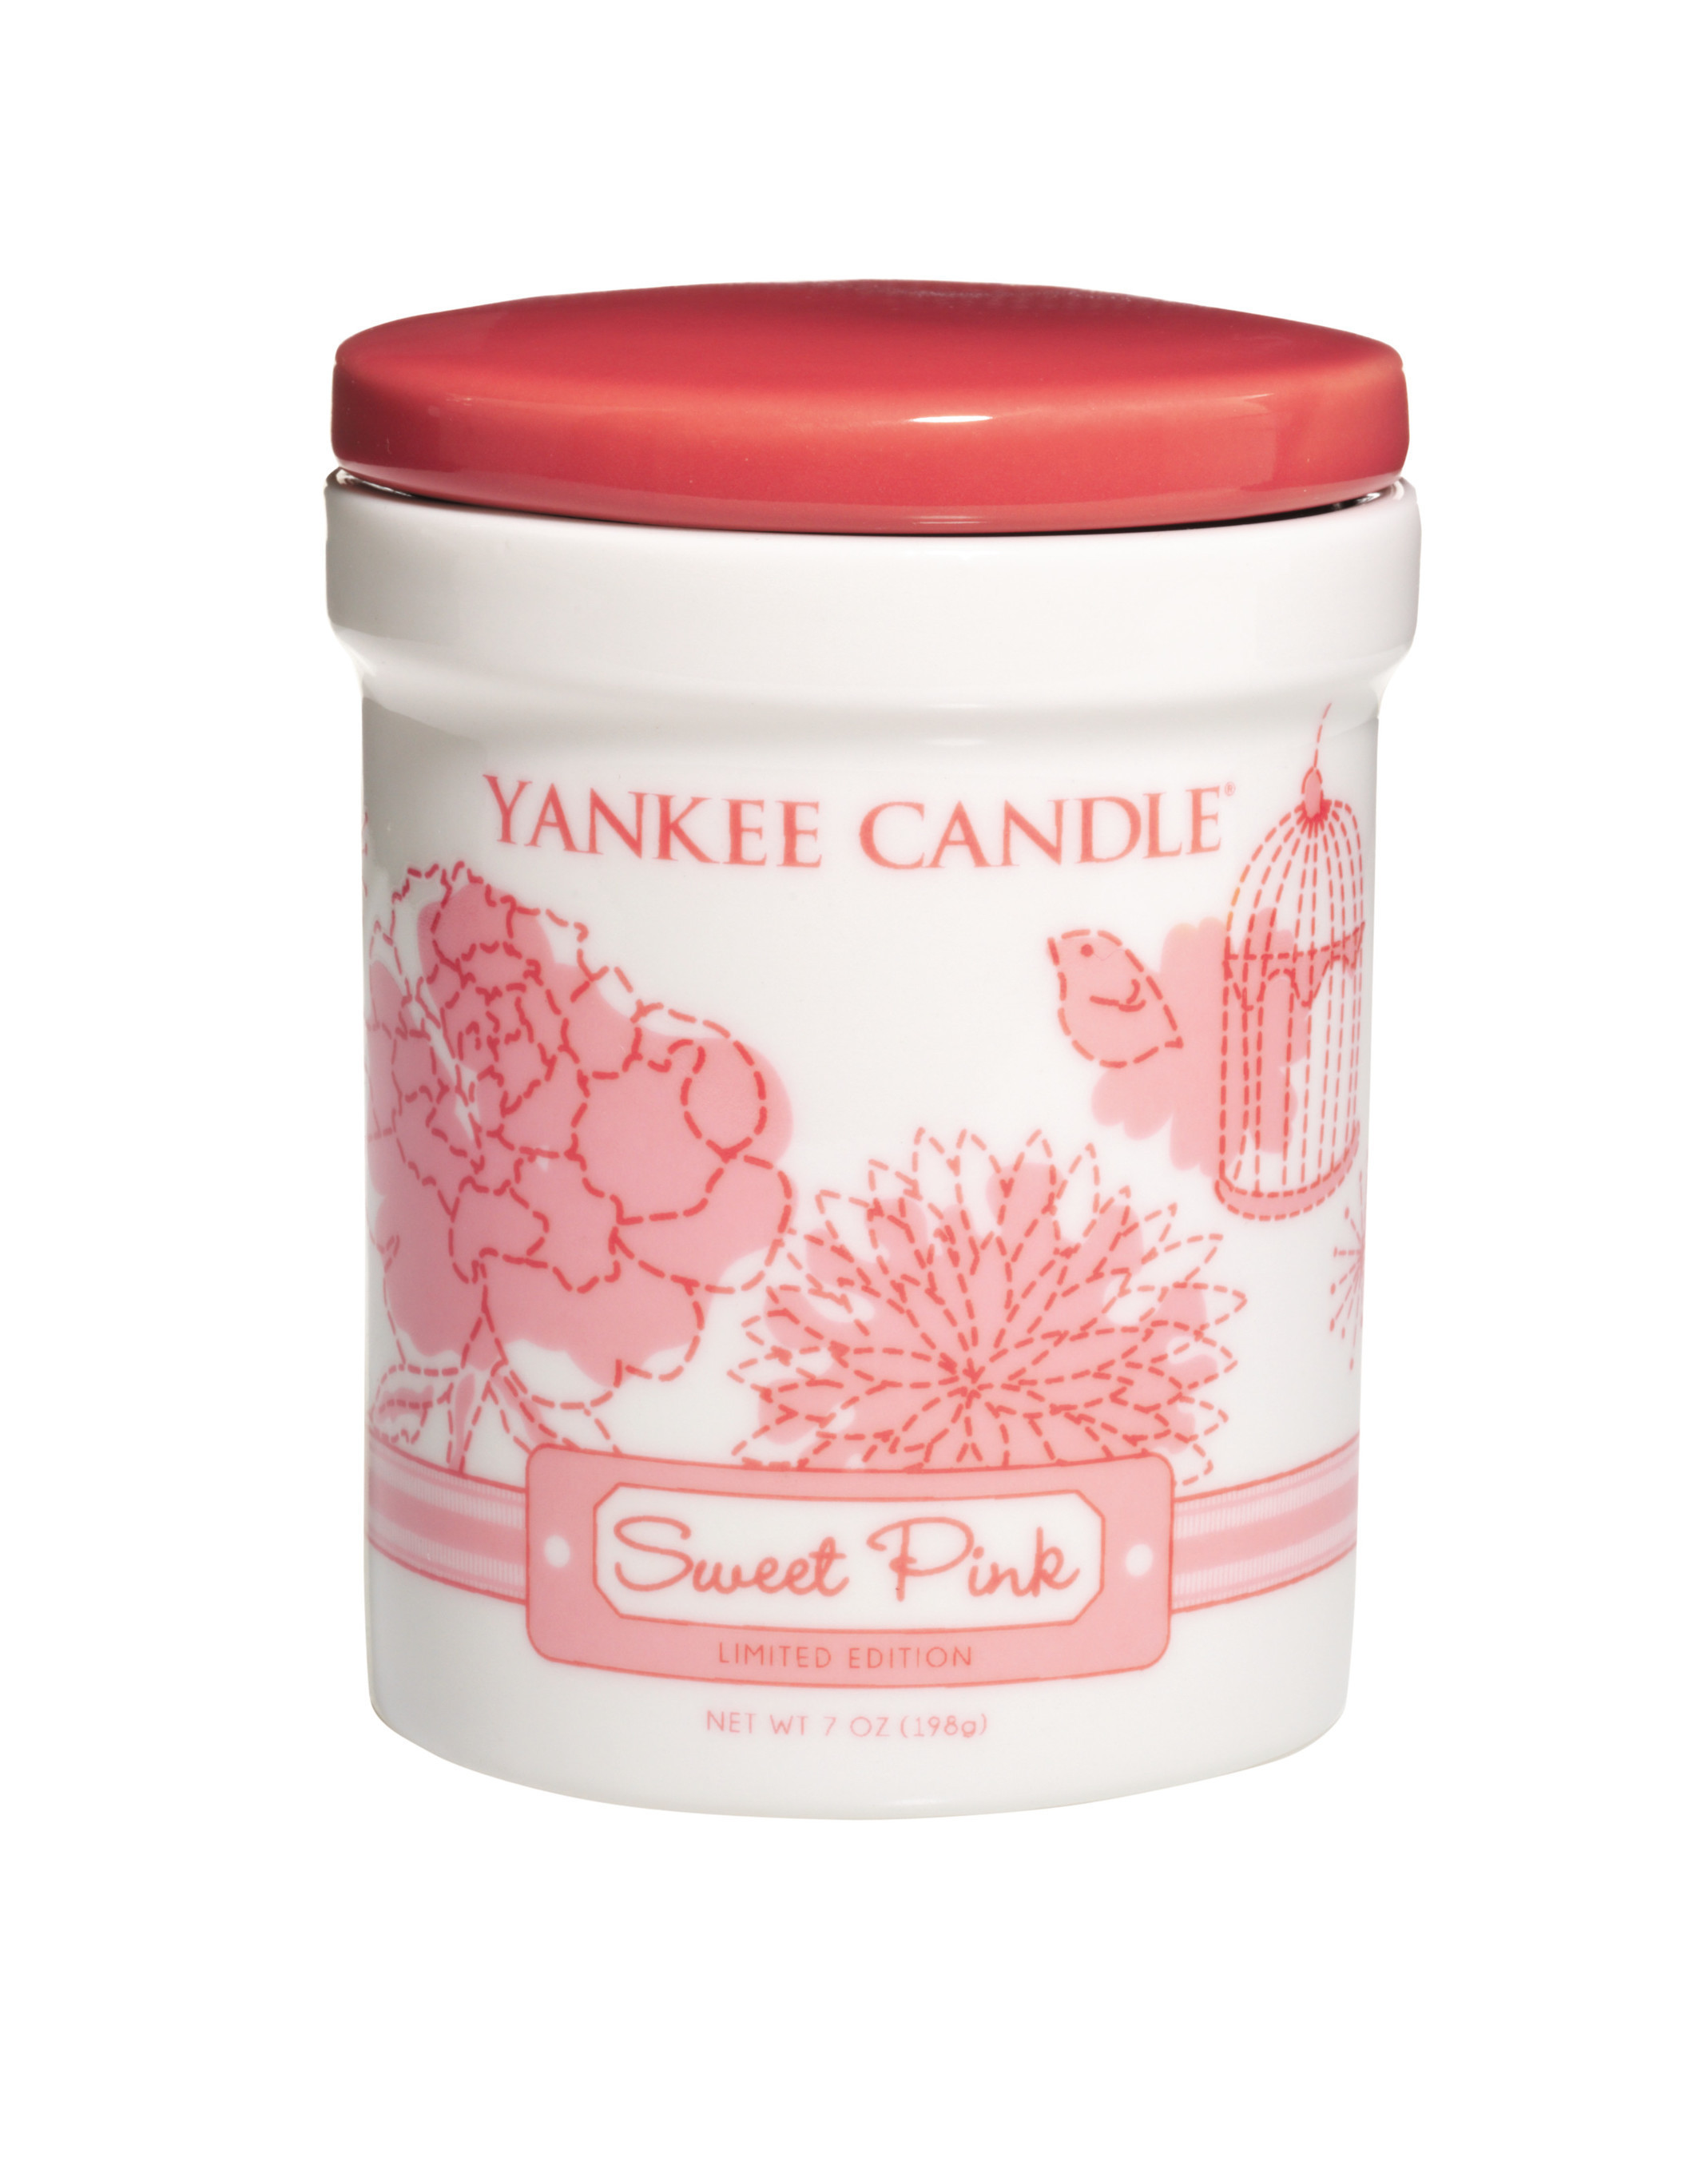 Sweet Pink, one of the three new fragrances from Yankee Candle’s new Dream Garden Collection, is a fresh blend of sweet floral nectars. (PRNewsFoto/The Yankee Candle Company, Inc.)